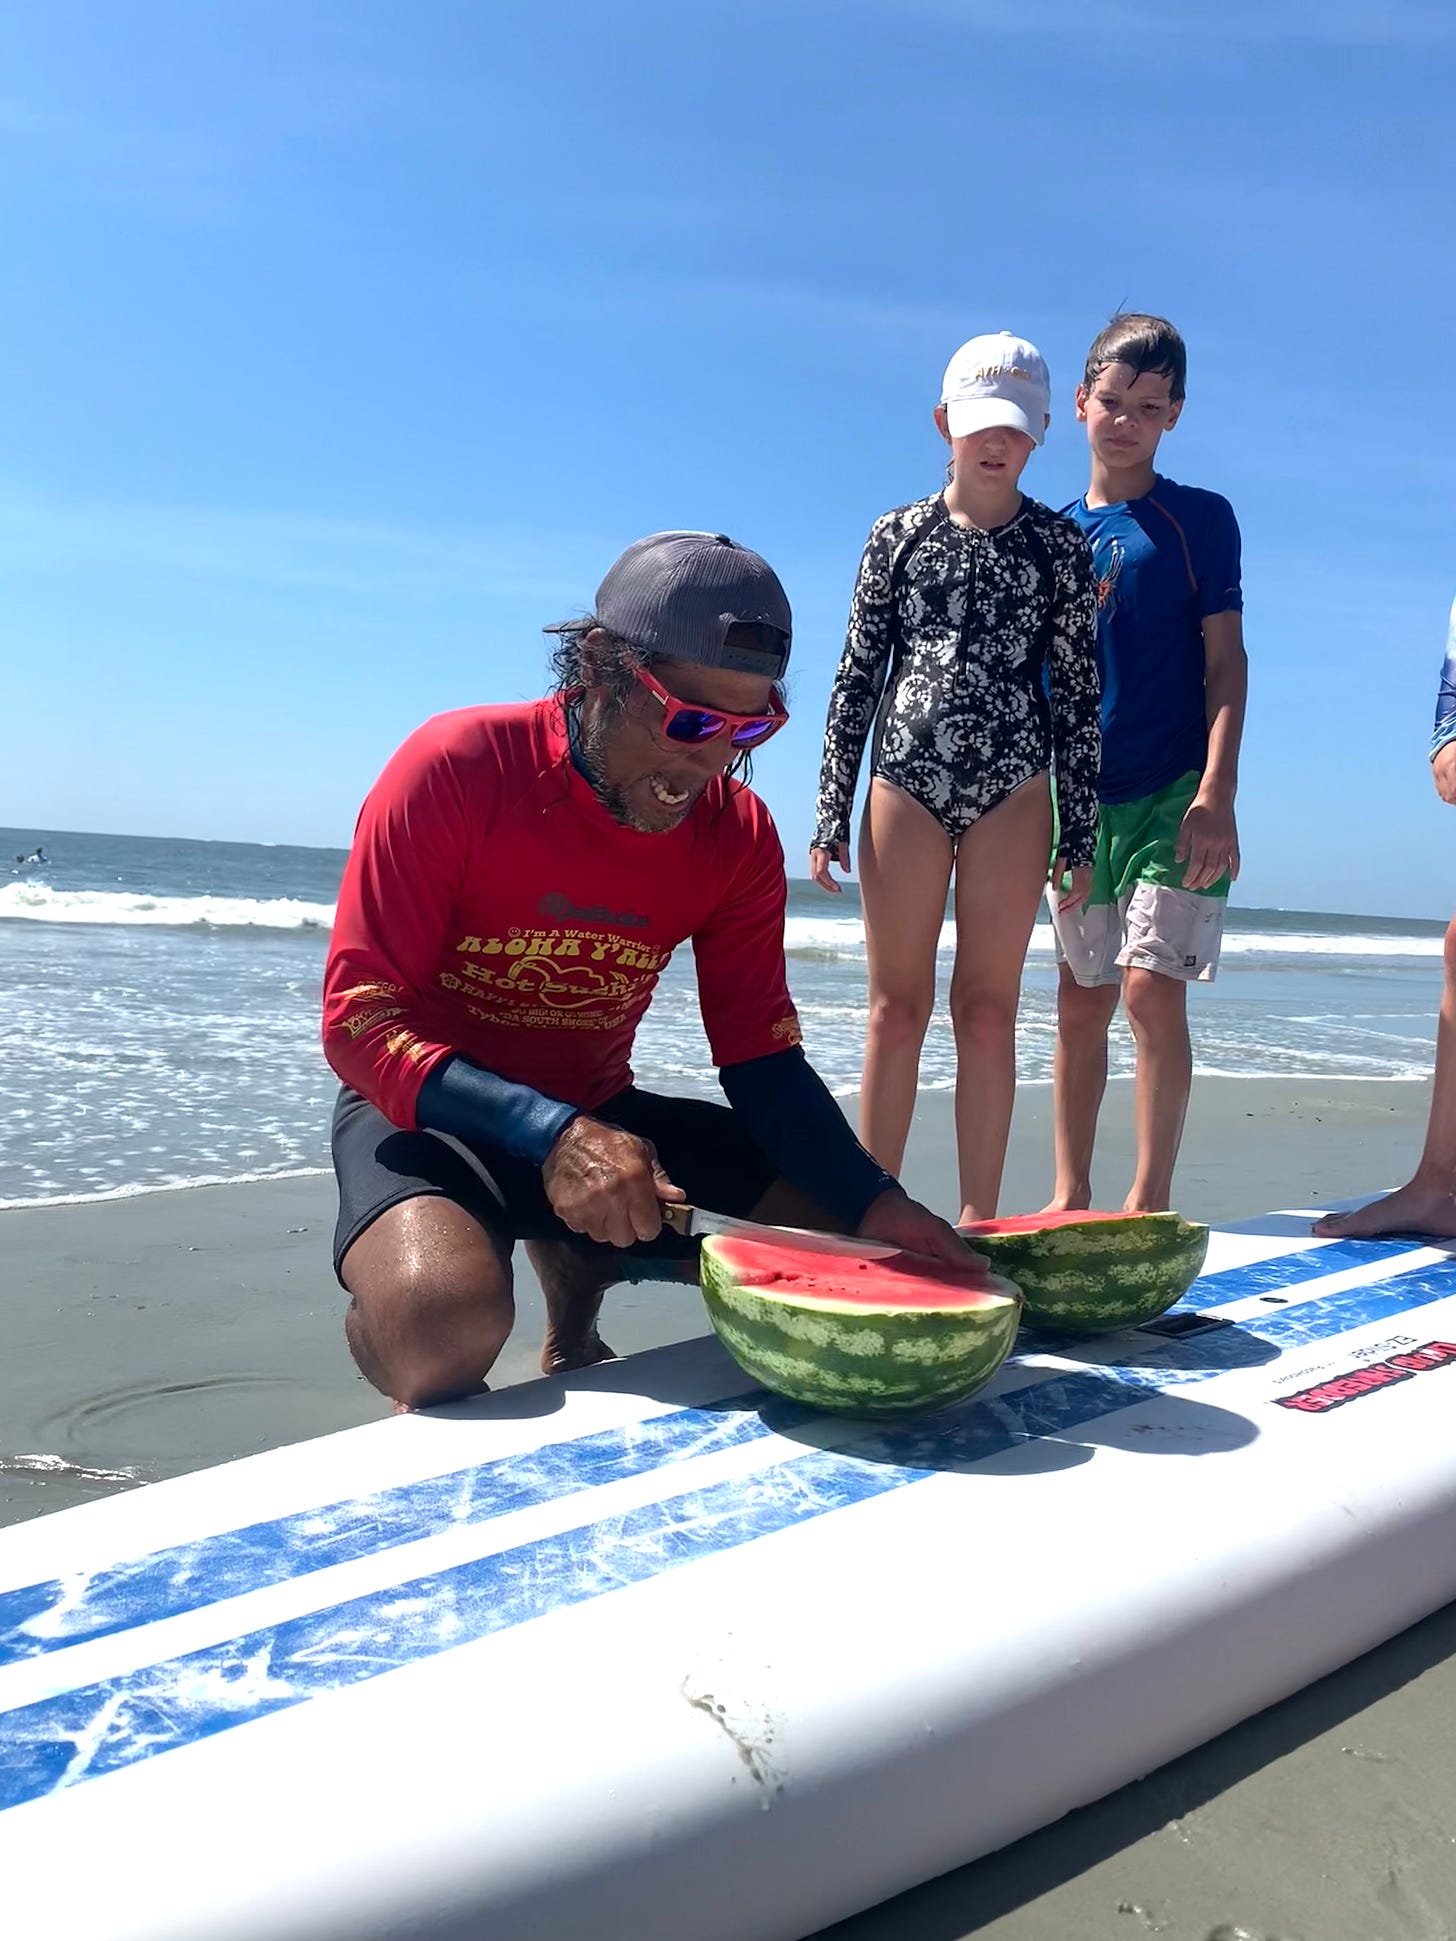 Tybee surf instructor back in the ocean two days after shark bite